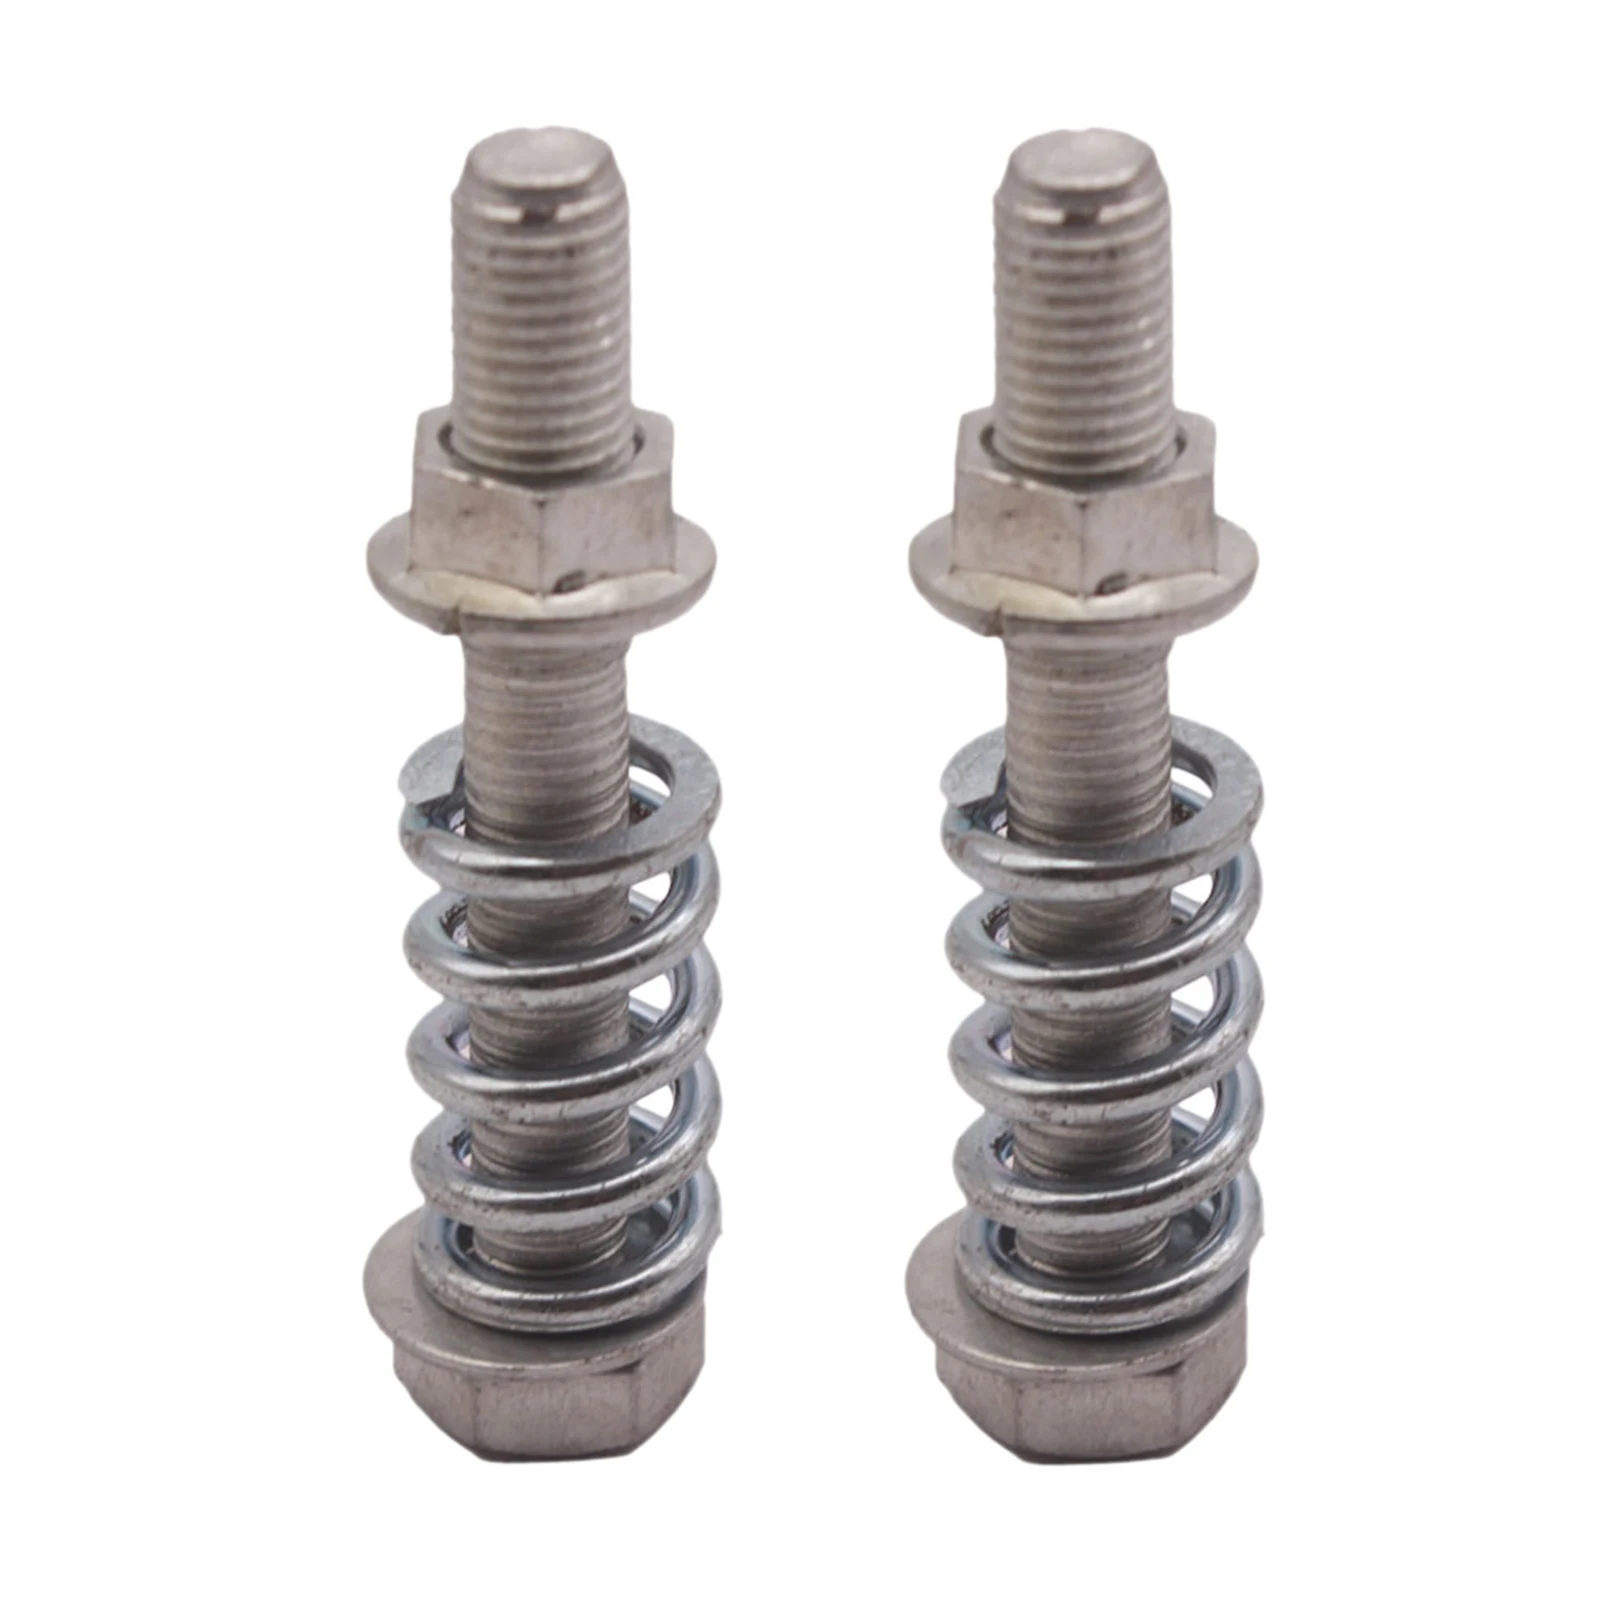 2Pcs M10x1.5 Exhaust and Spring Nut Kit Repair Replacement High quality